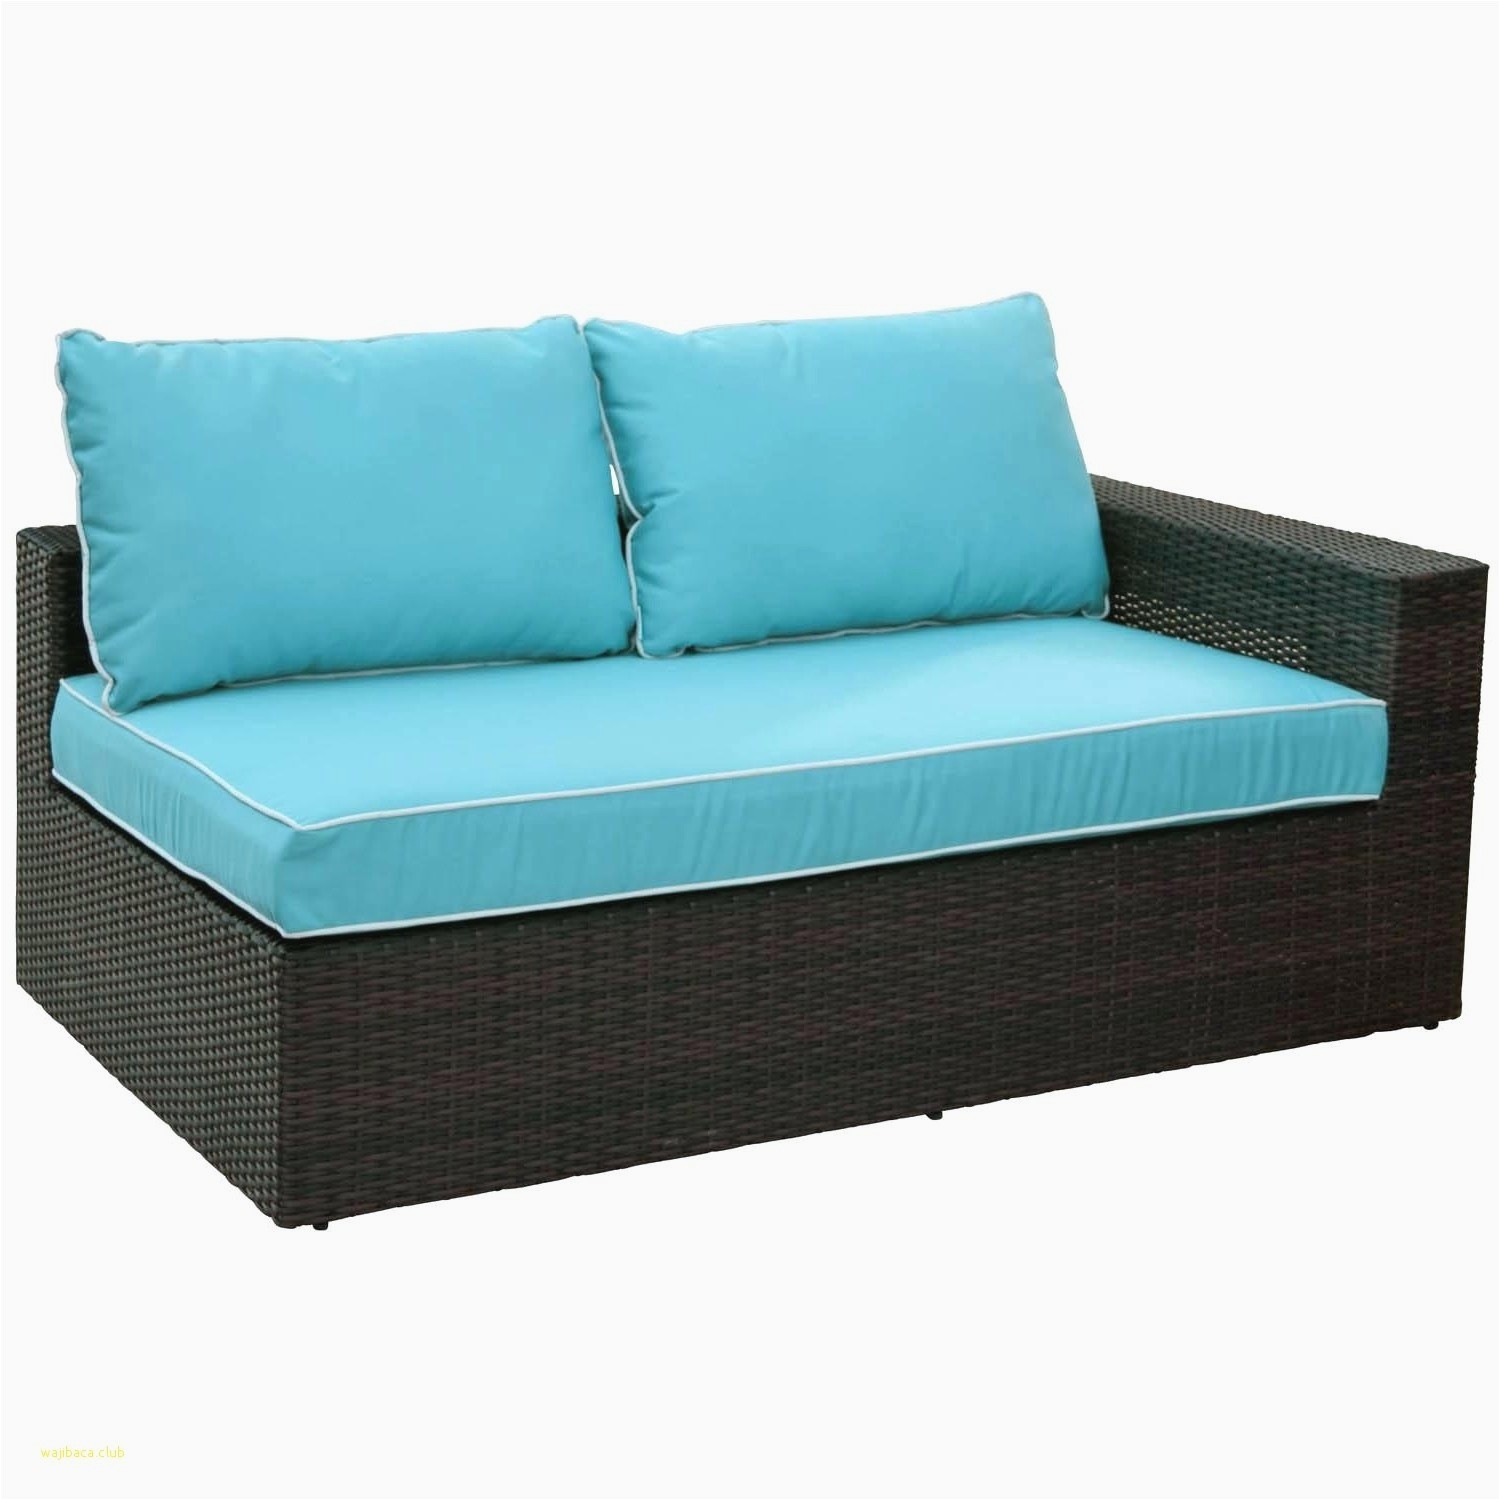 outdoor furniture free wicker outdoor sofa 0d patio chairs sale design outside patio furniture sale